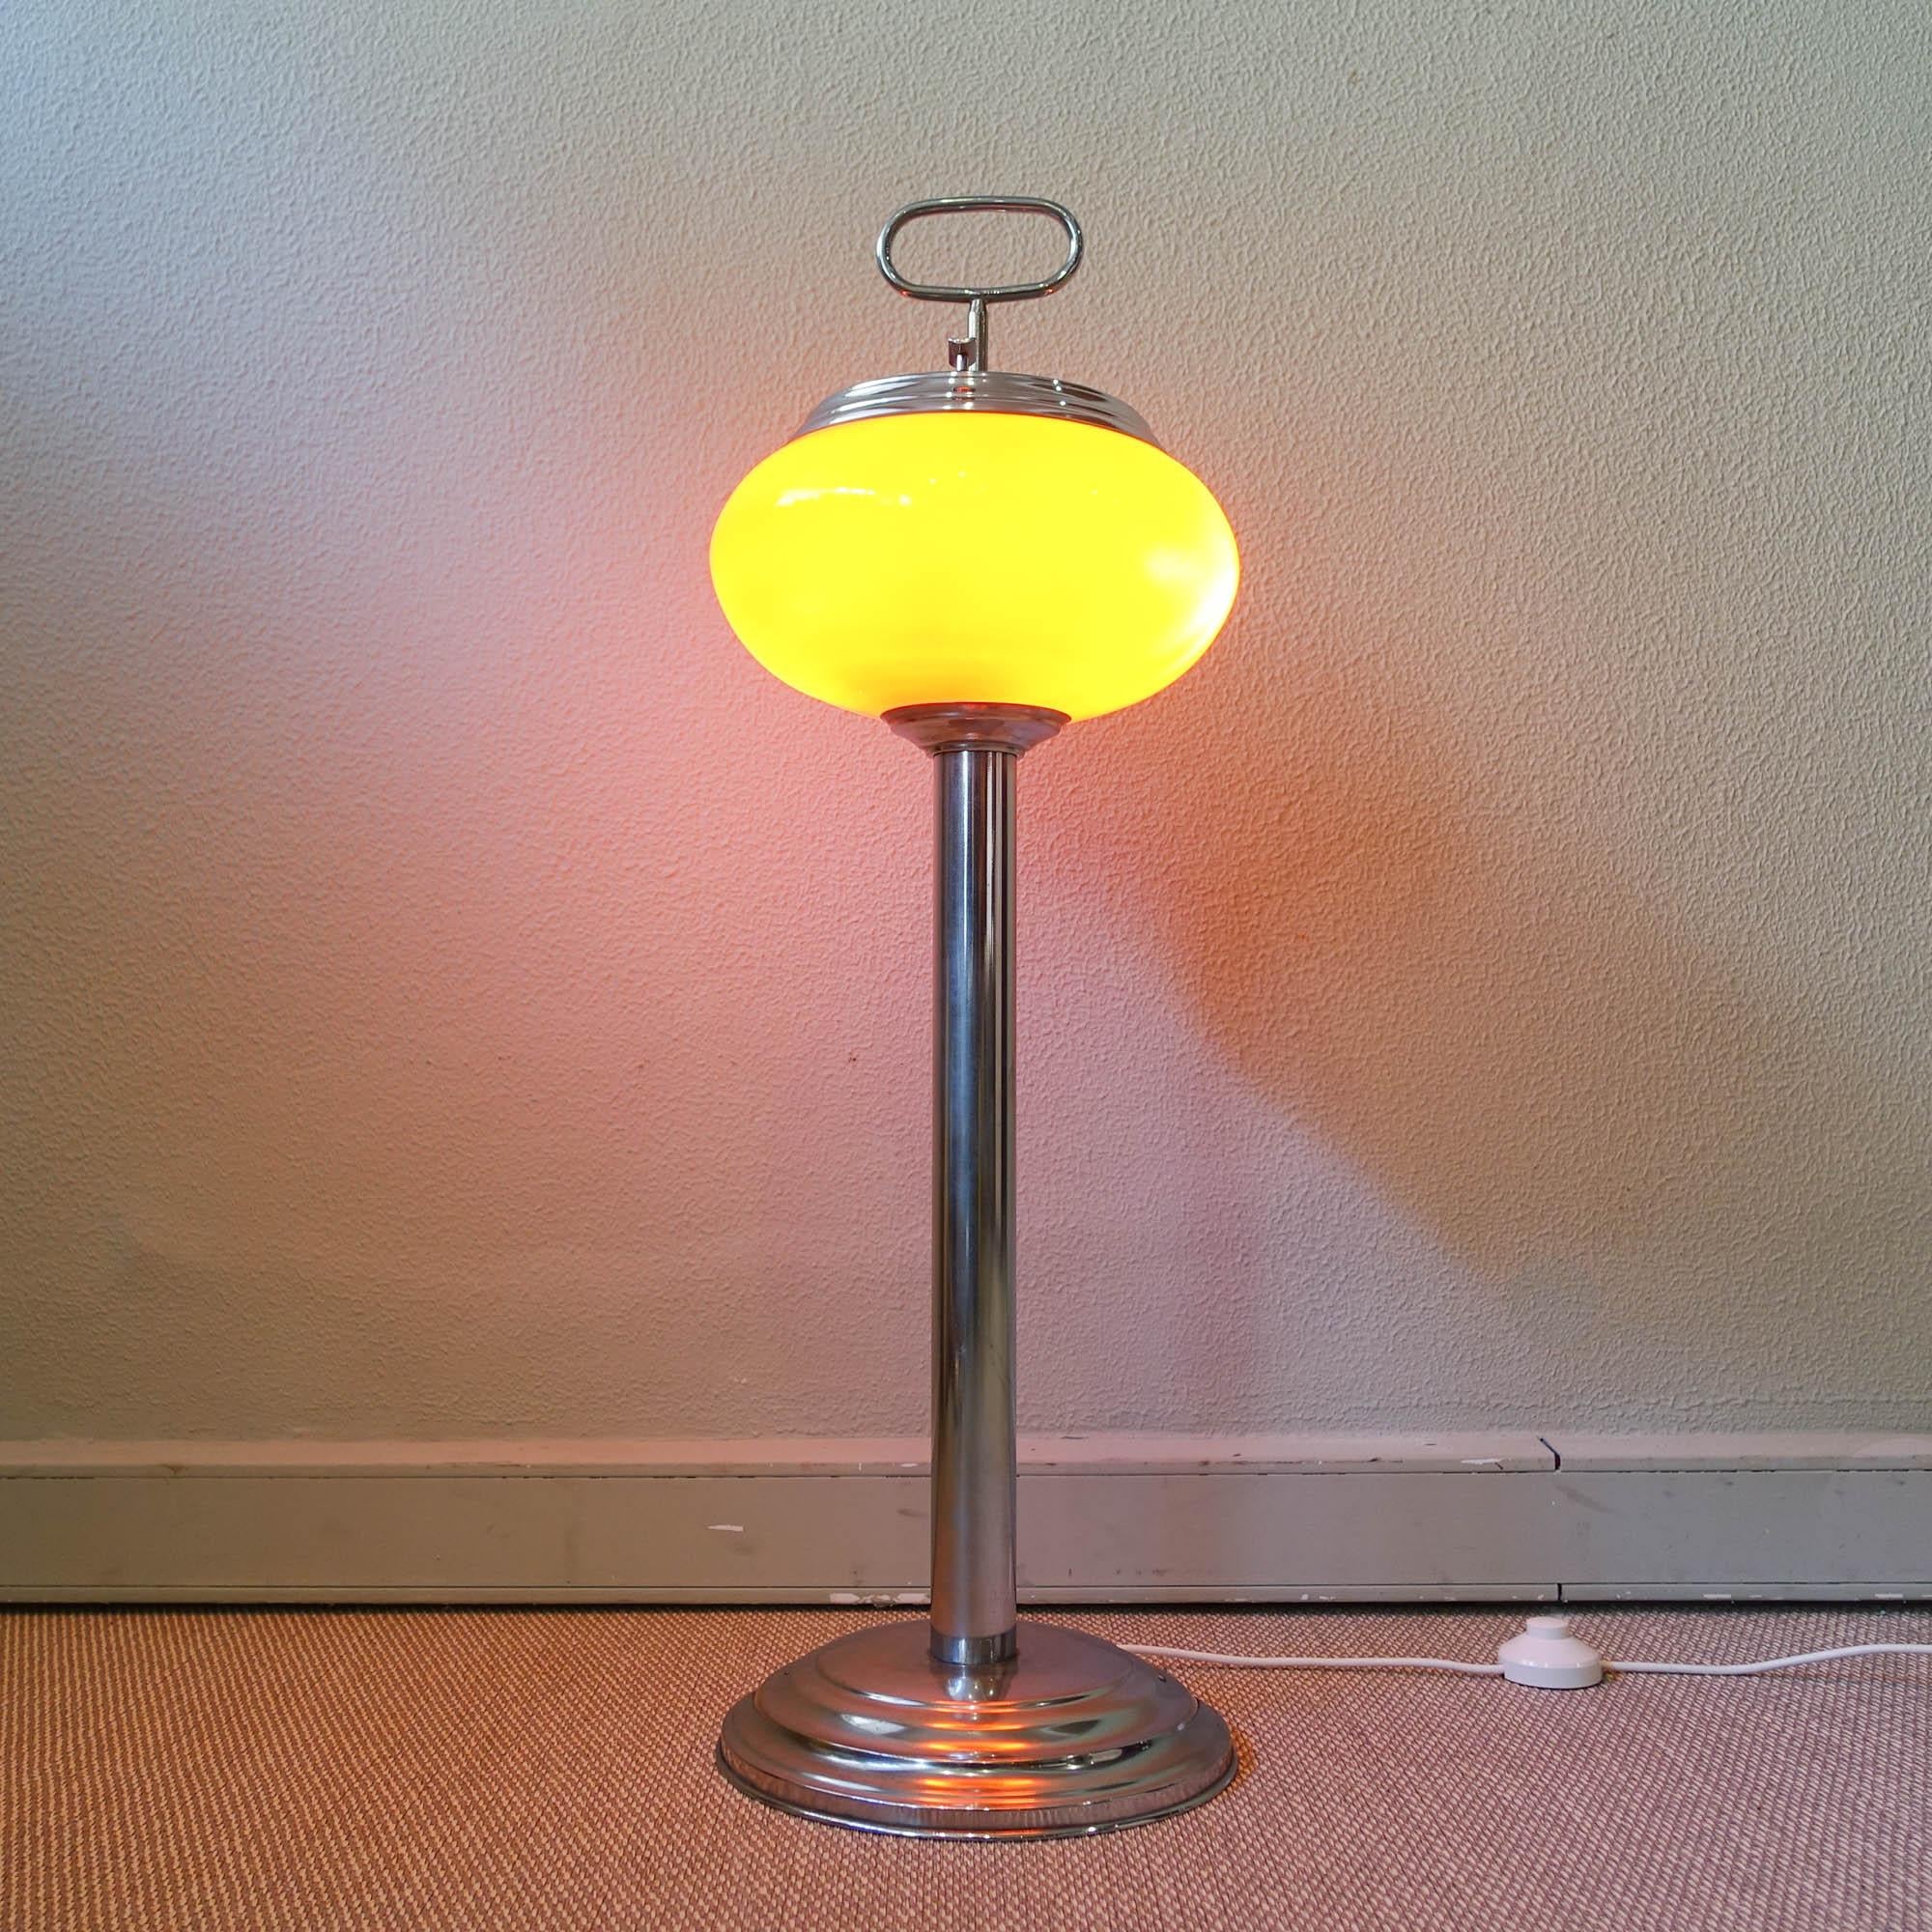 This astray/ floor lamp was produced in Portugal and is original from the 1960's.They were specially used on the Casinos in Portugal on that era. It has a chrome metal base, with a chrome stem were an orange opaline glass lampshade is set. On top of